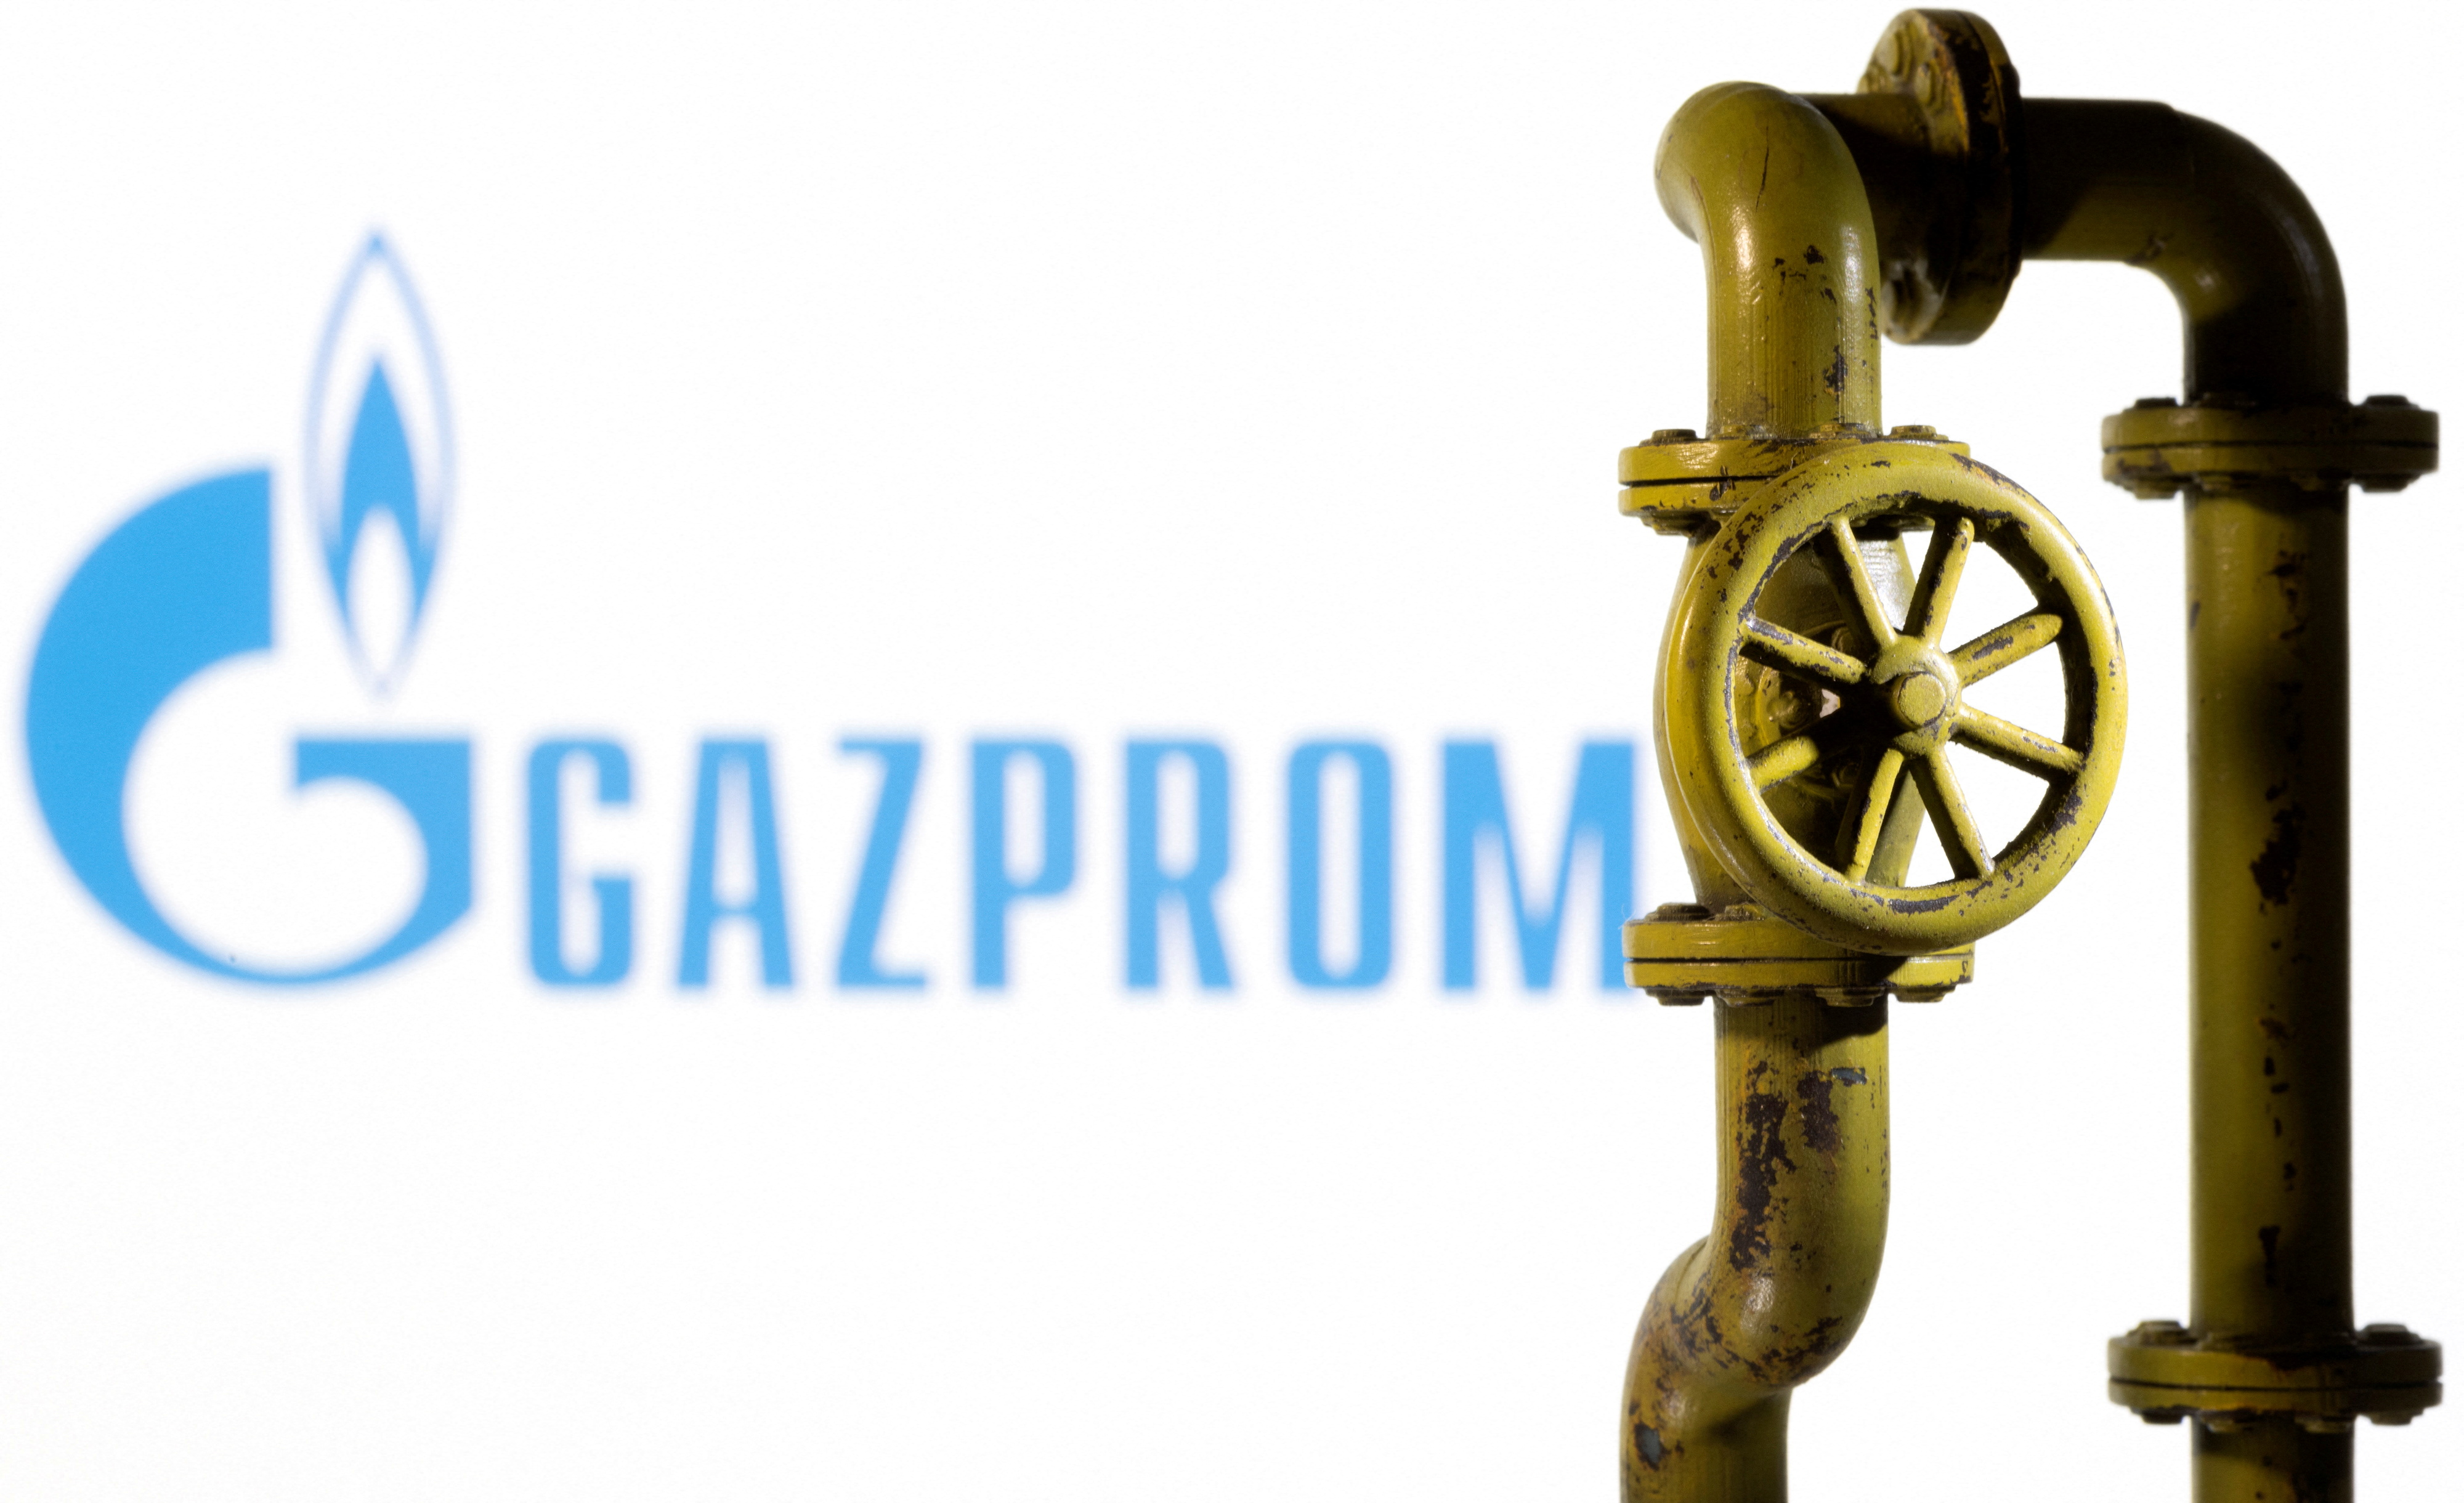 Illustration shows Gazprom logo and natural gas pipeline